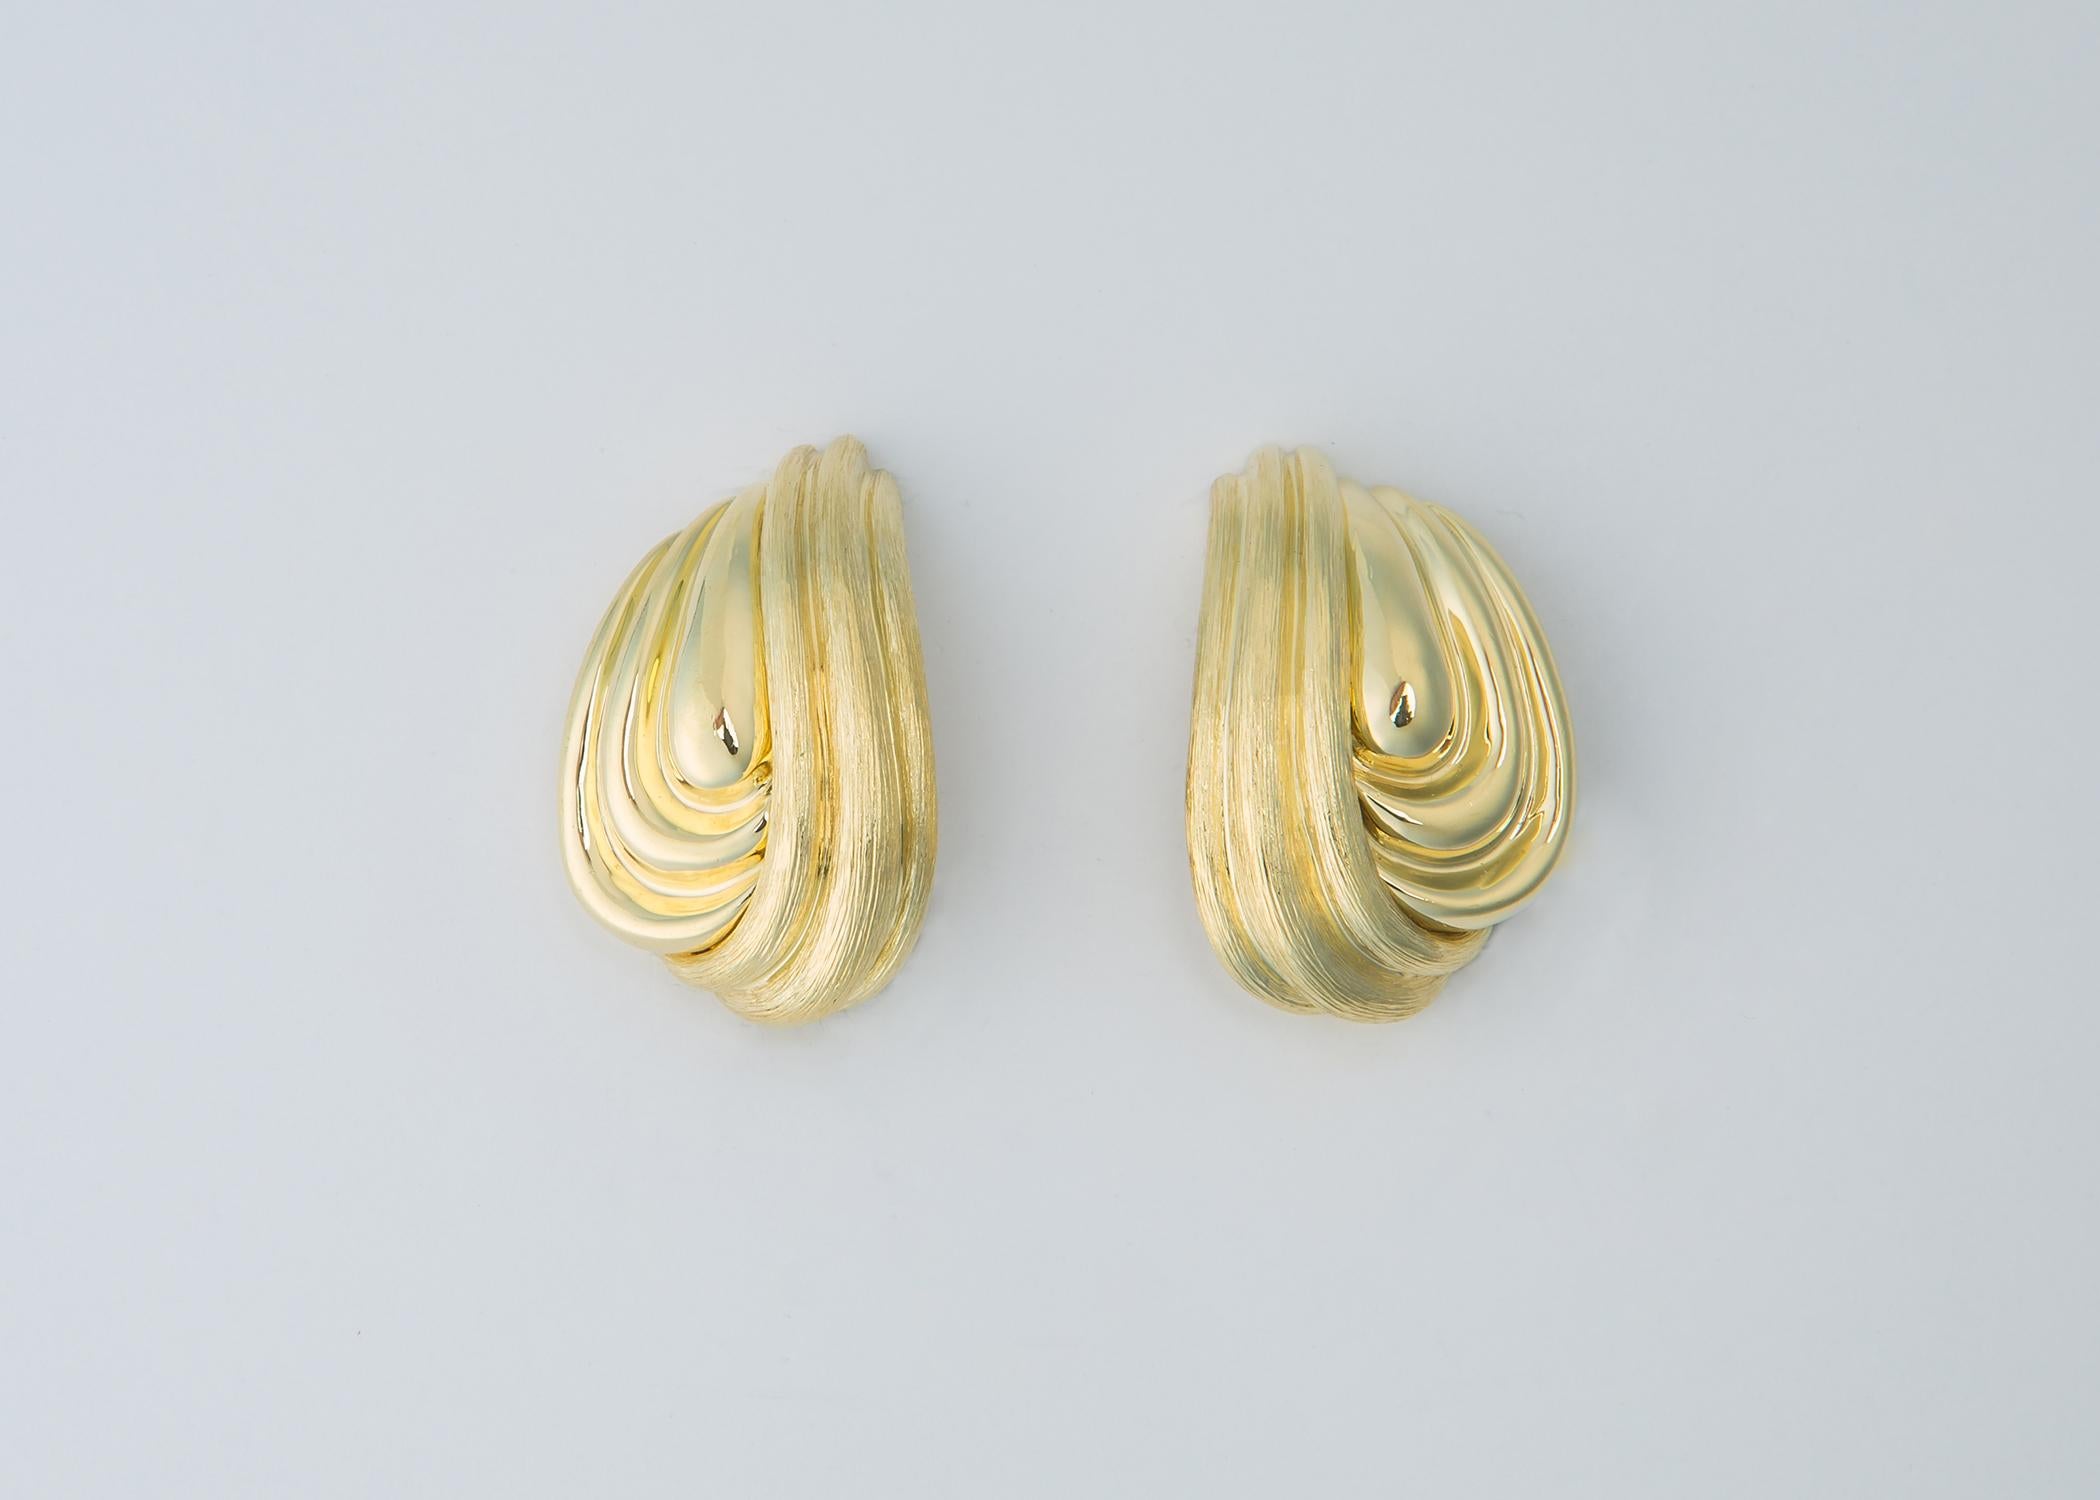 Contemporary Elegant Henry Dunay Sabi and Shiny Gold Earrings